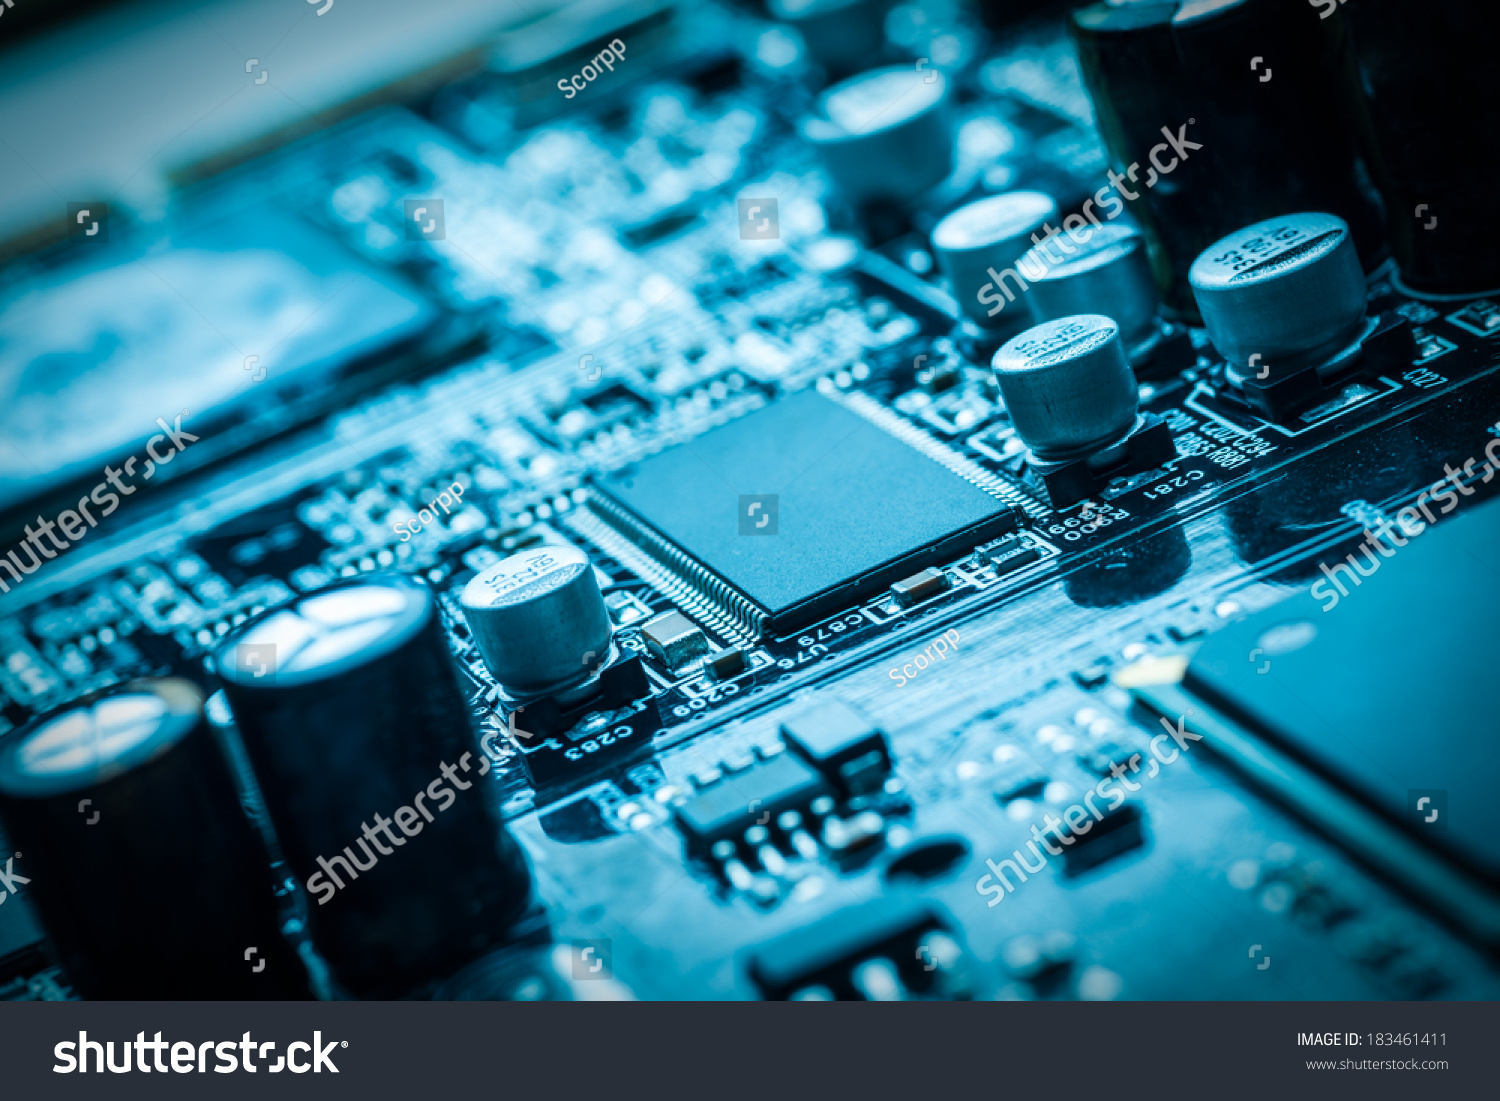 powerpoint-template-microprocessor-electronics-close-up-of-ipklnilii